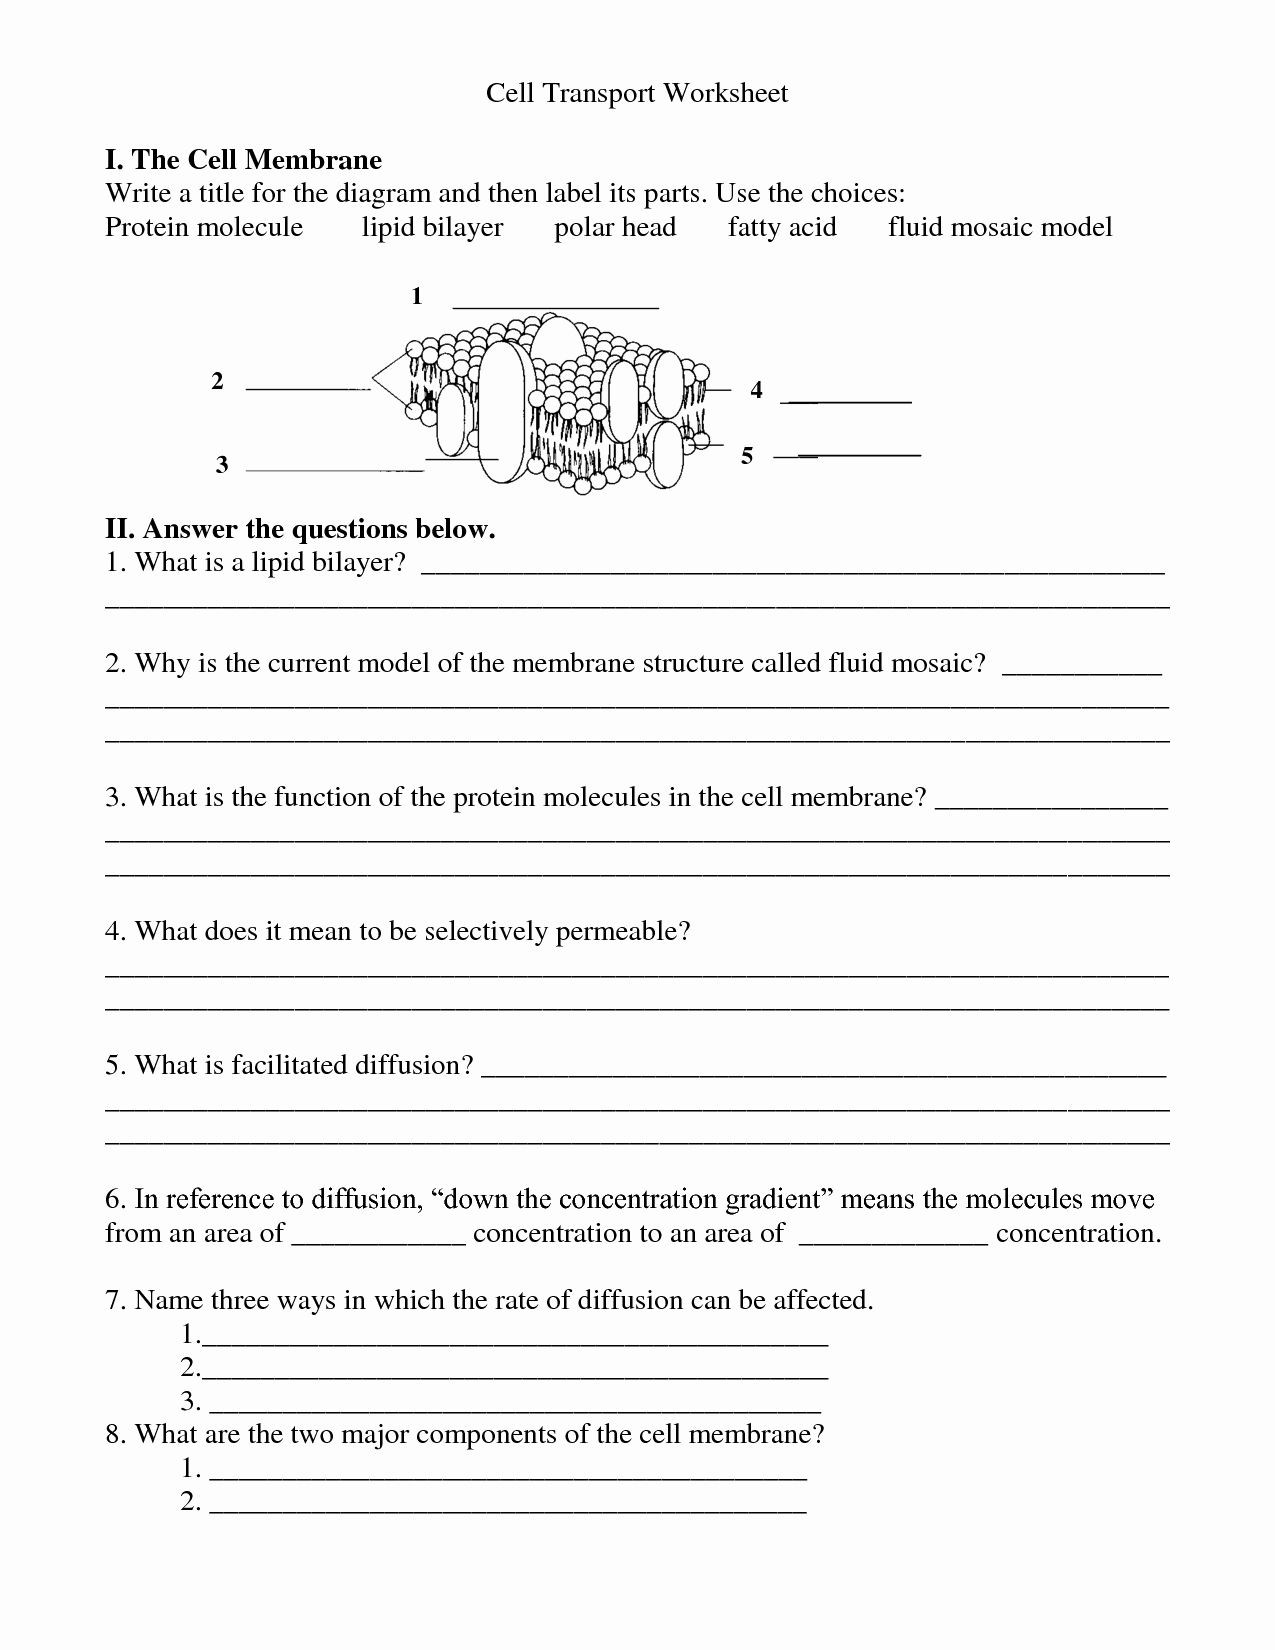 Cell Membrane Images Worksheet Answers Cell Membrane Worksheet Answers Awesome 12 Best